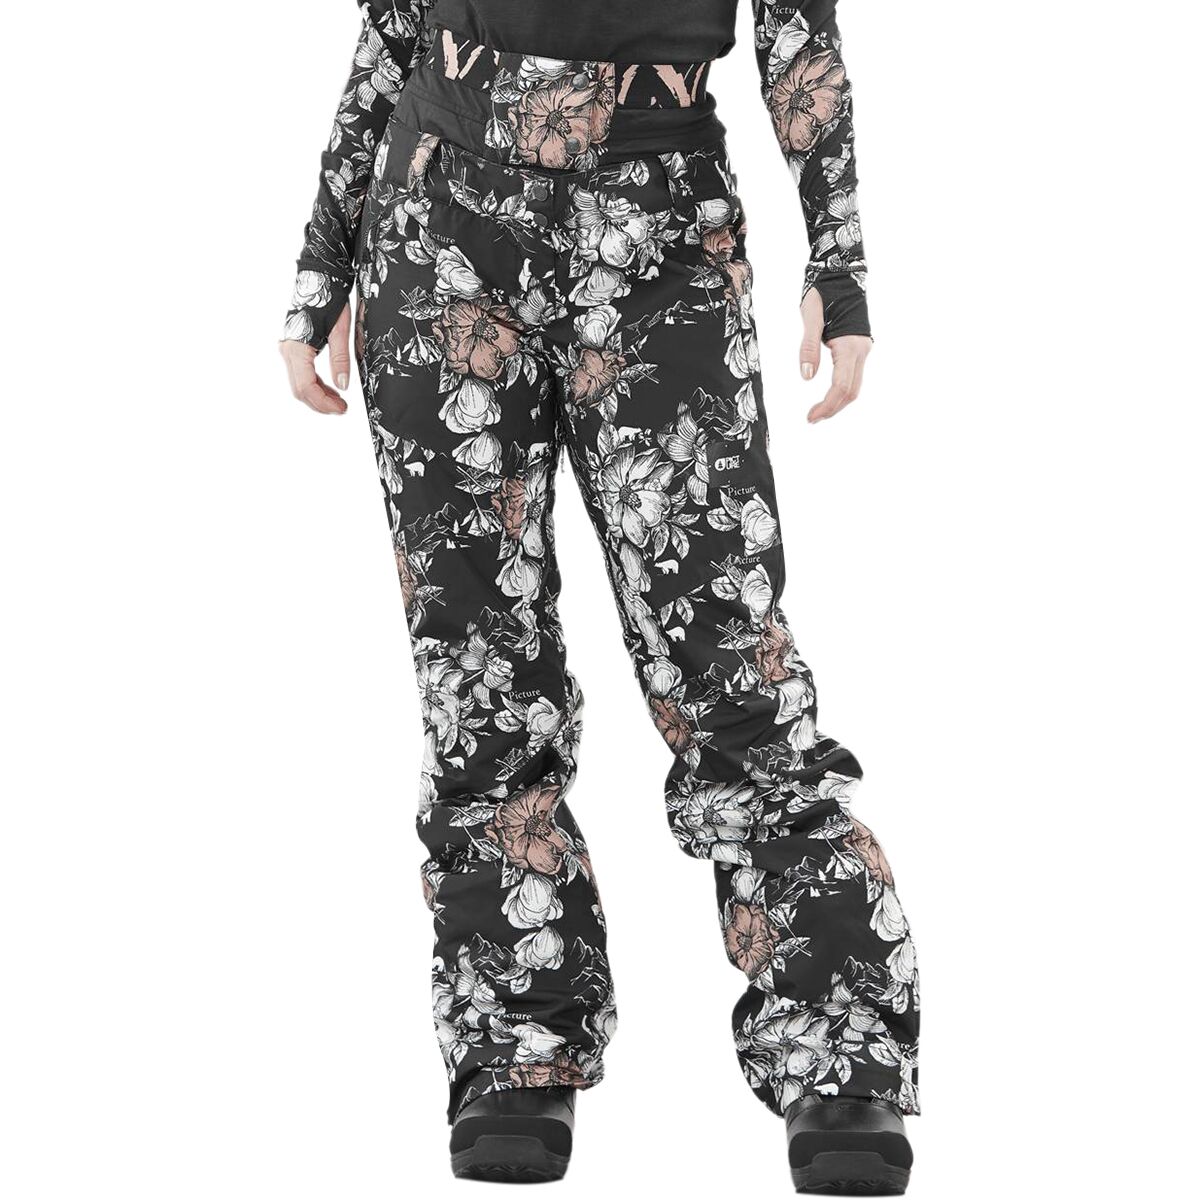 Picture Organic Clothing Under Pant M Black Ski trousers  Snowleader